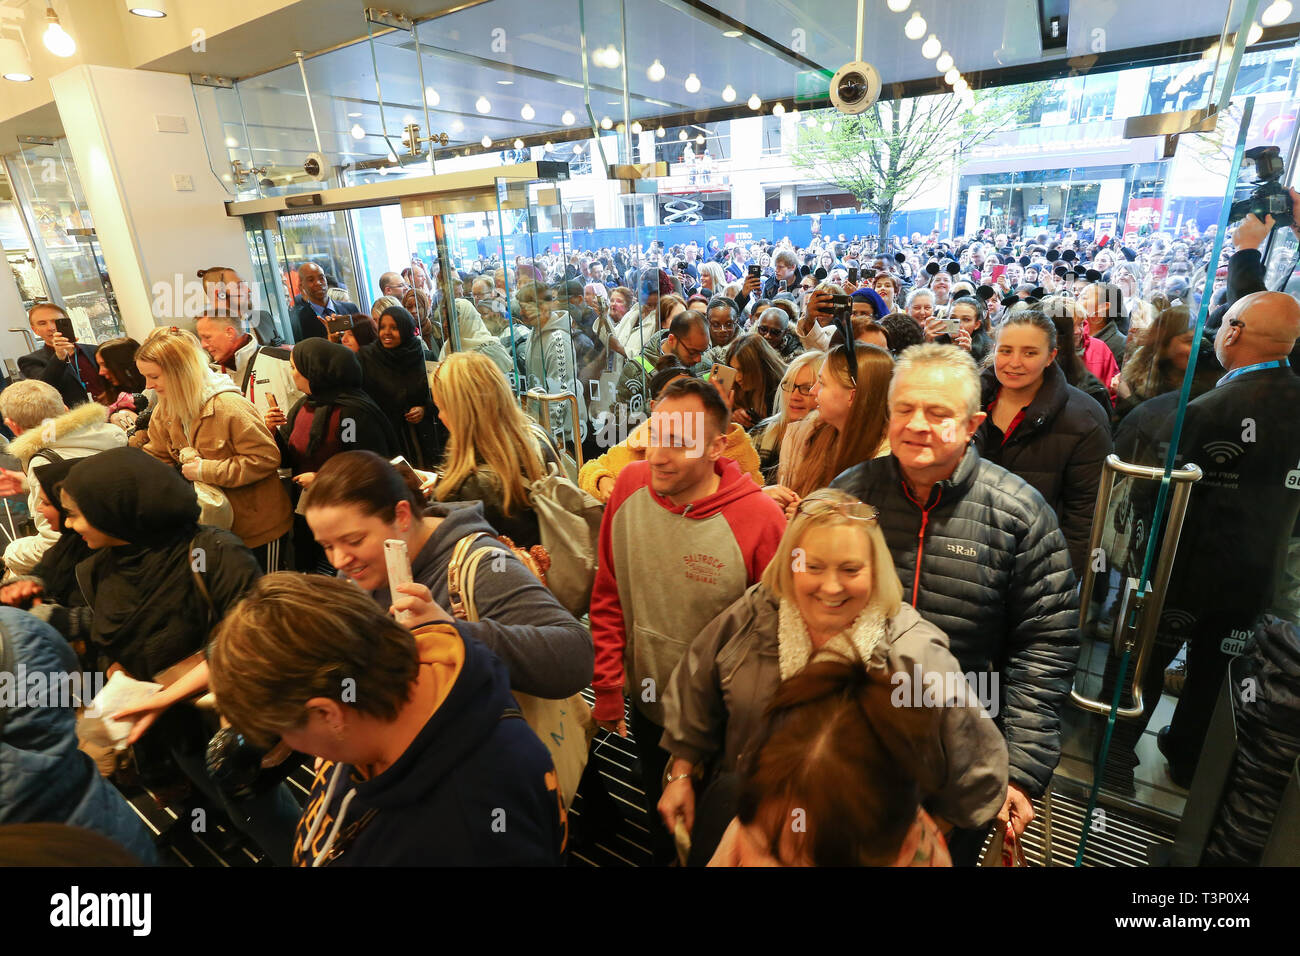 Birmingham, UK. 11th April,2019. The world's biggest Primark store opens today in Birmingham. Hundreds of customers crowd in the entry as the doors open for the first time. Peter Lopeman/Alamy Live News Stock Photo